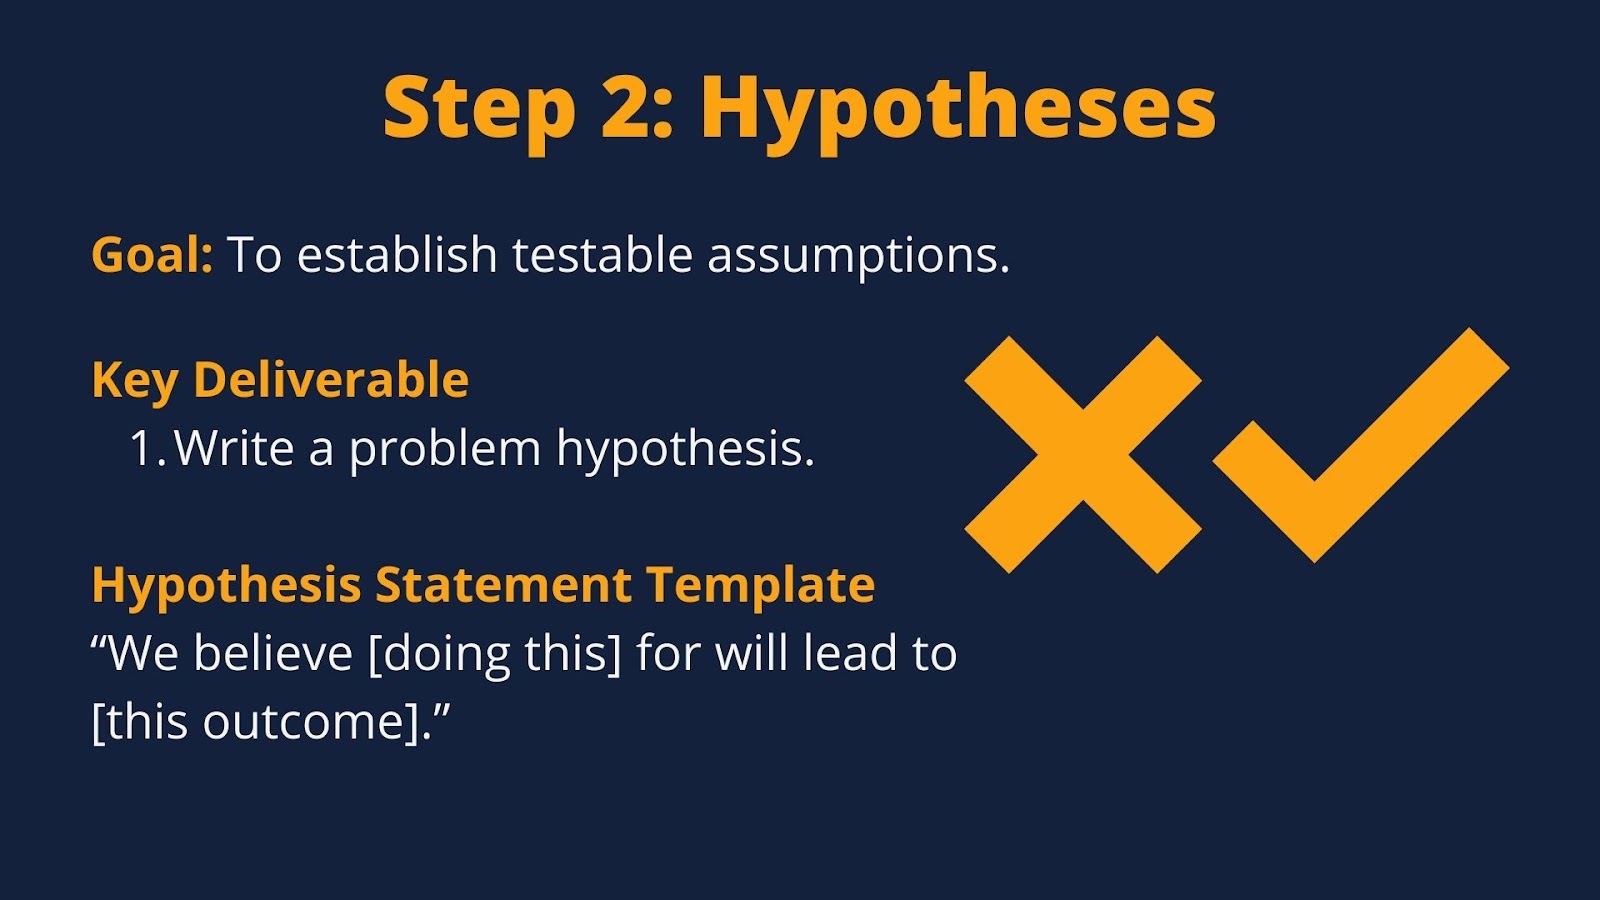 User Experience (UX) Research Learning Spiral Step 2: Hypotheses. Image describes goals and key deliverables of this stage. 